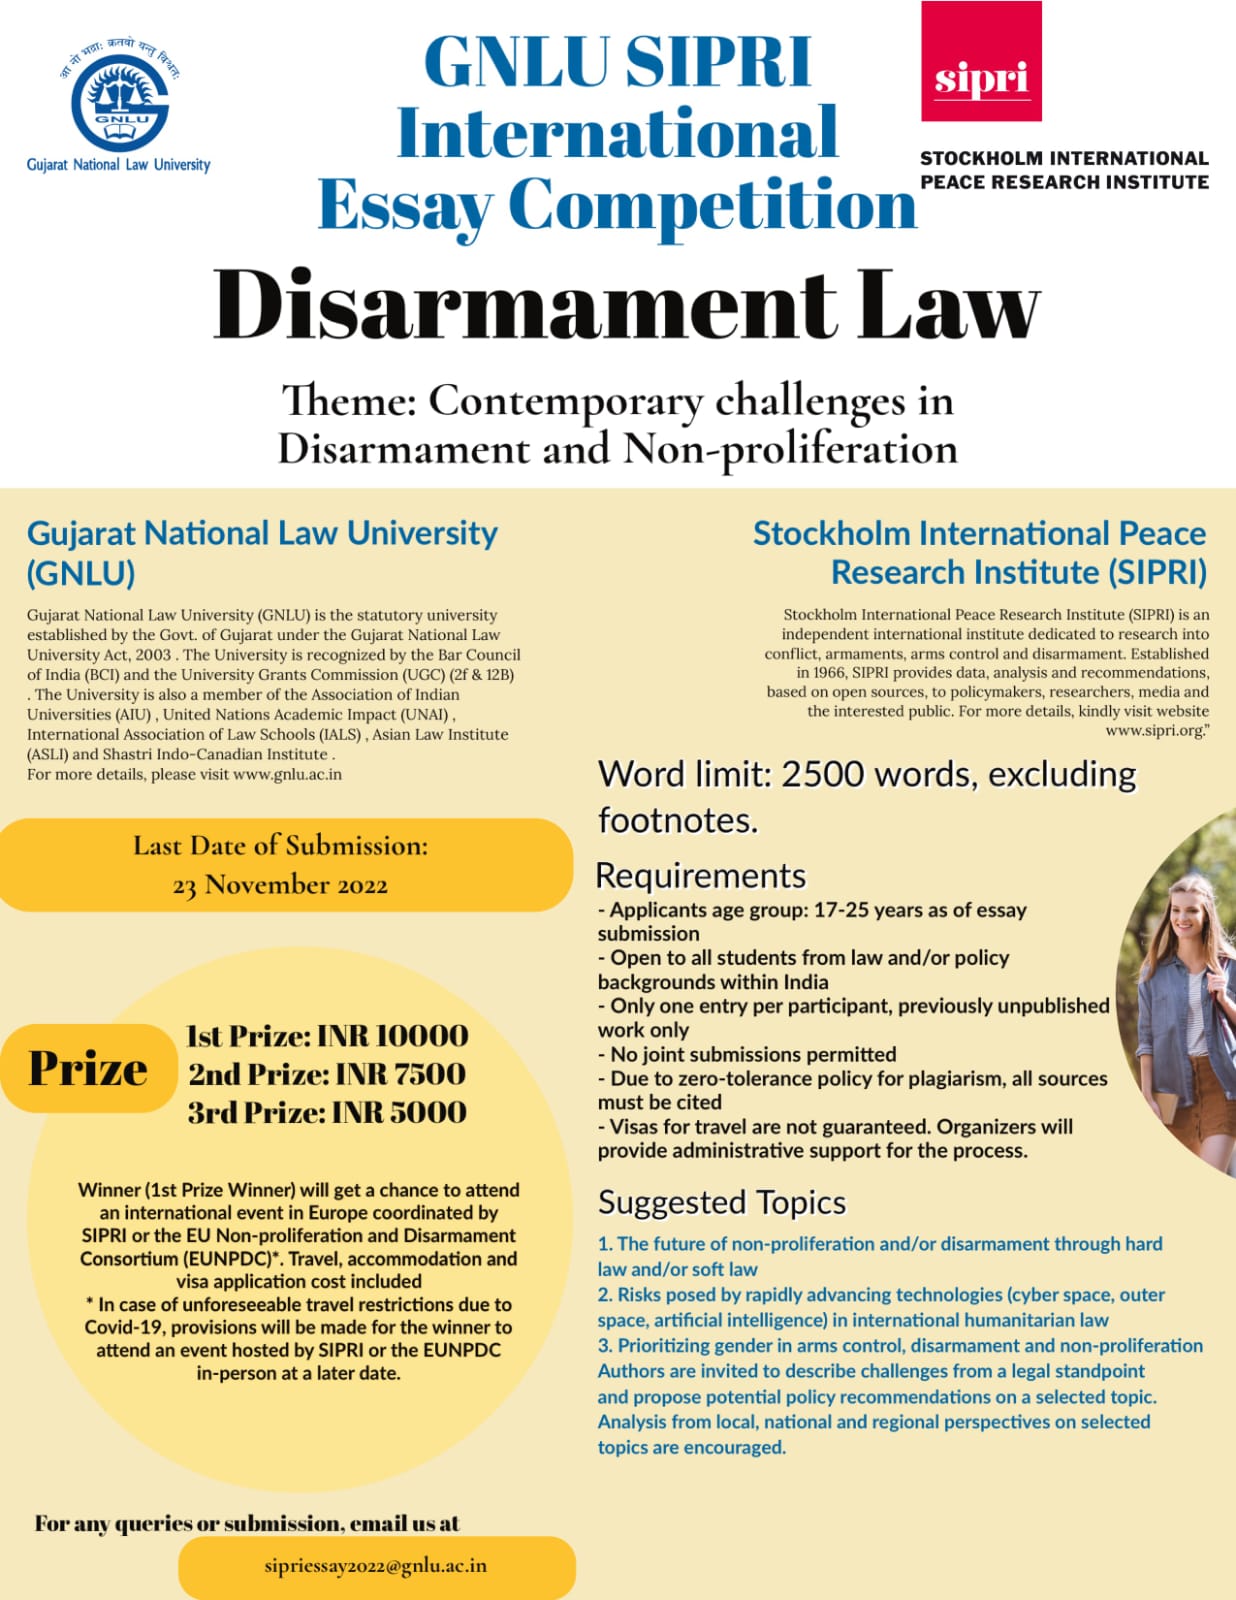 GNLU SIPRI International Essay Competition on Disarmament Law [Prizes Worth Upto Rs 10,000]: Submit by 23 Nov. 2022